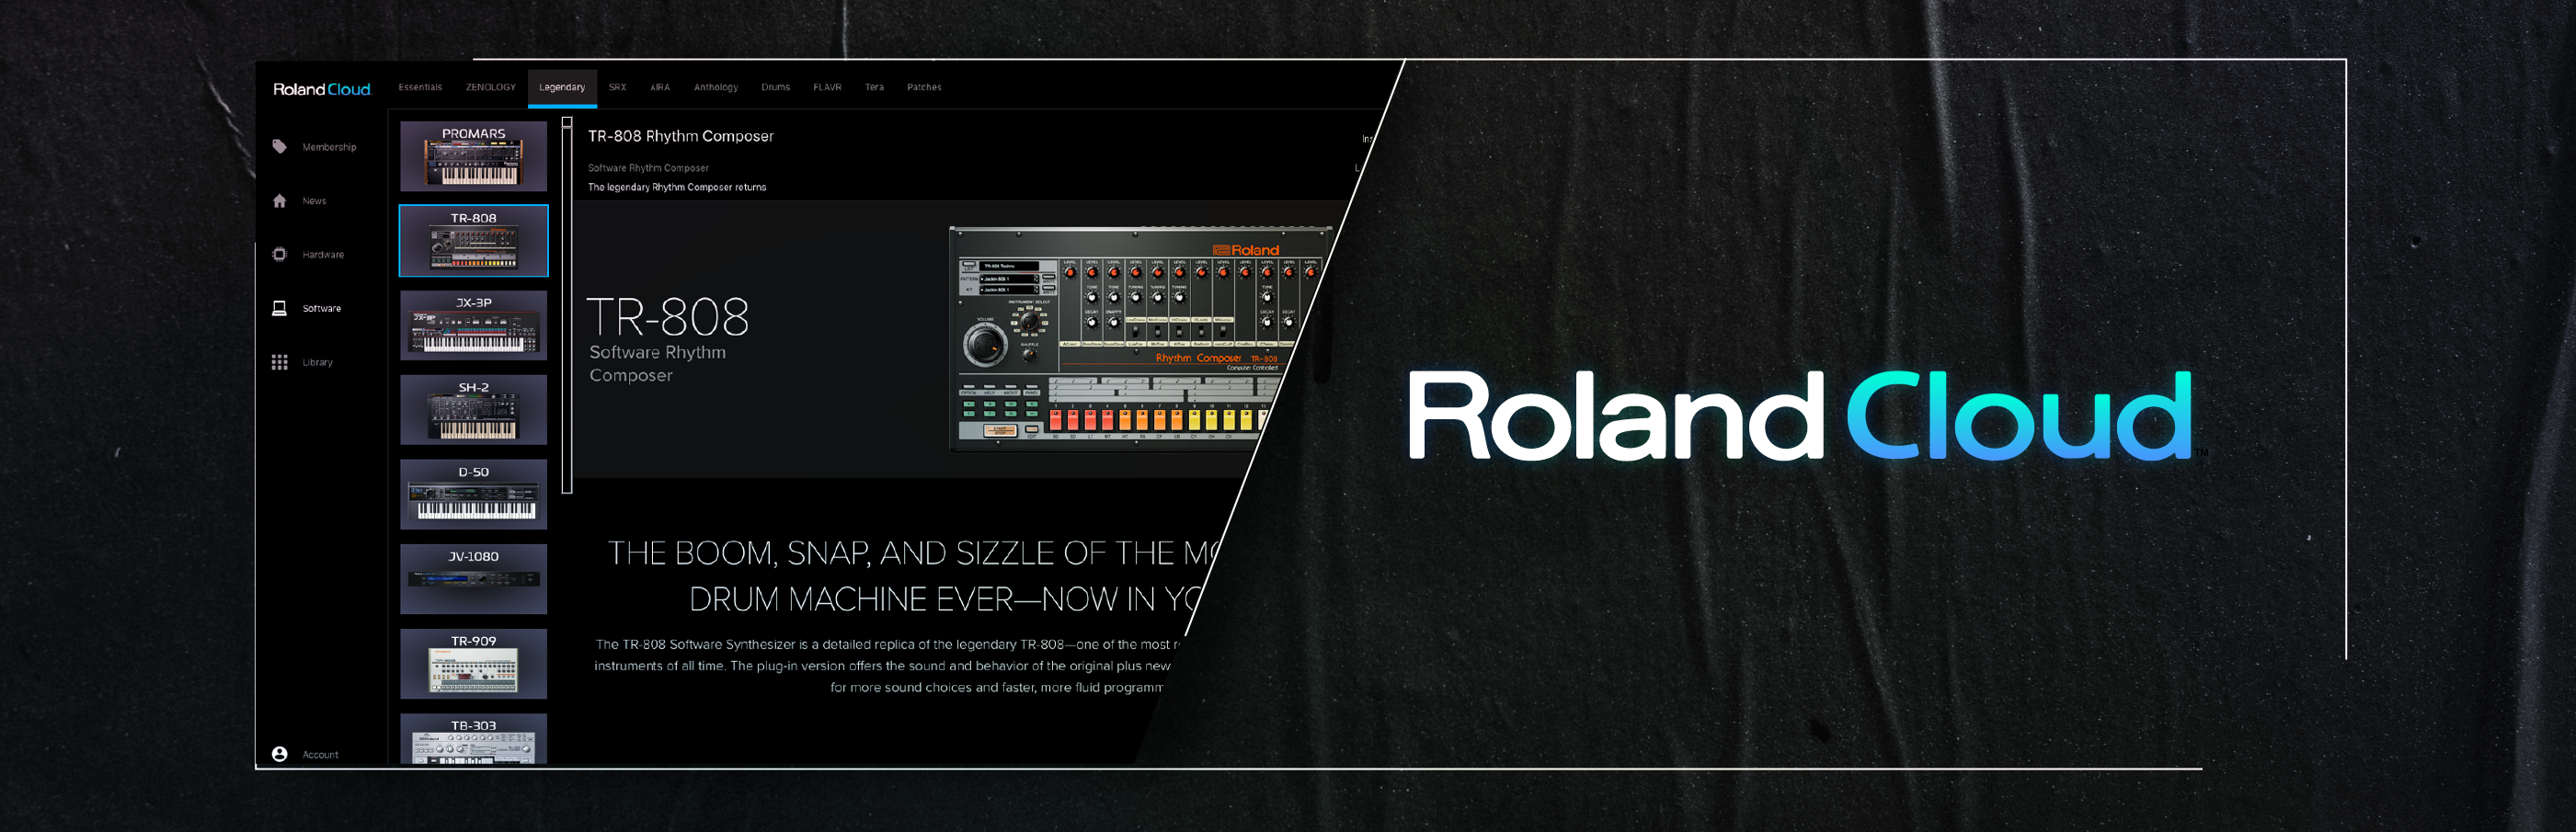 roland cloud manager download